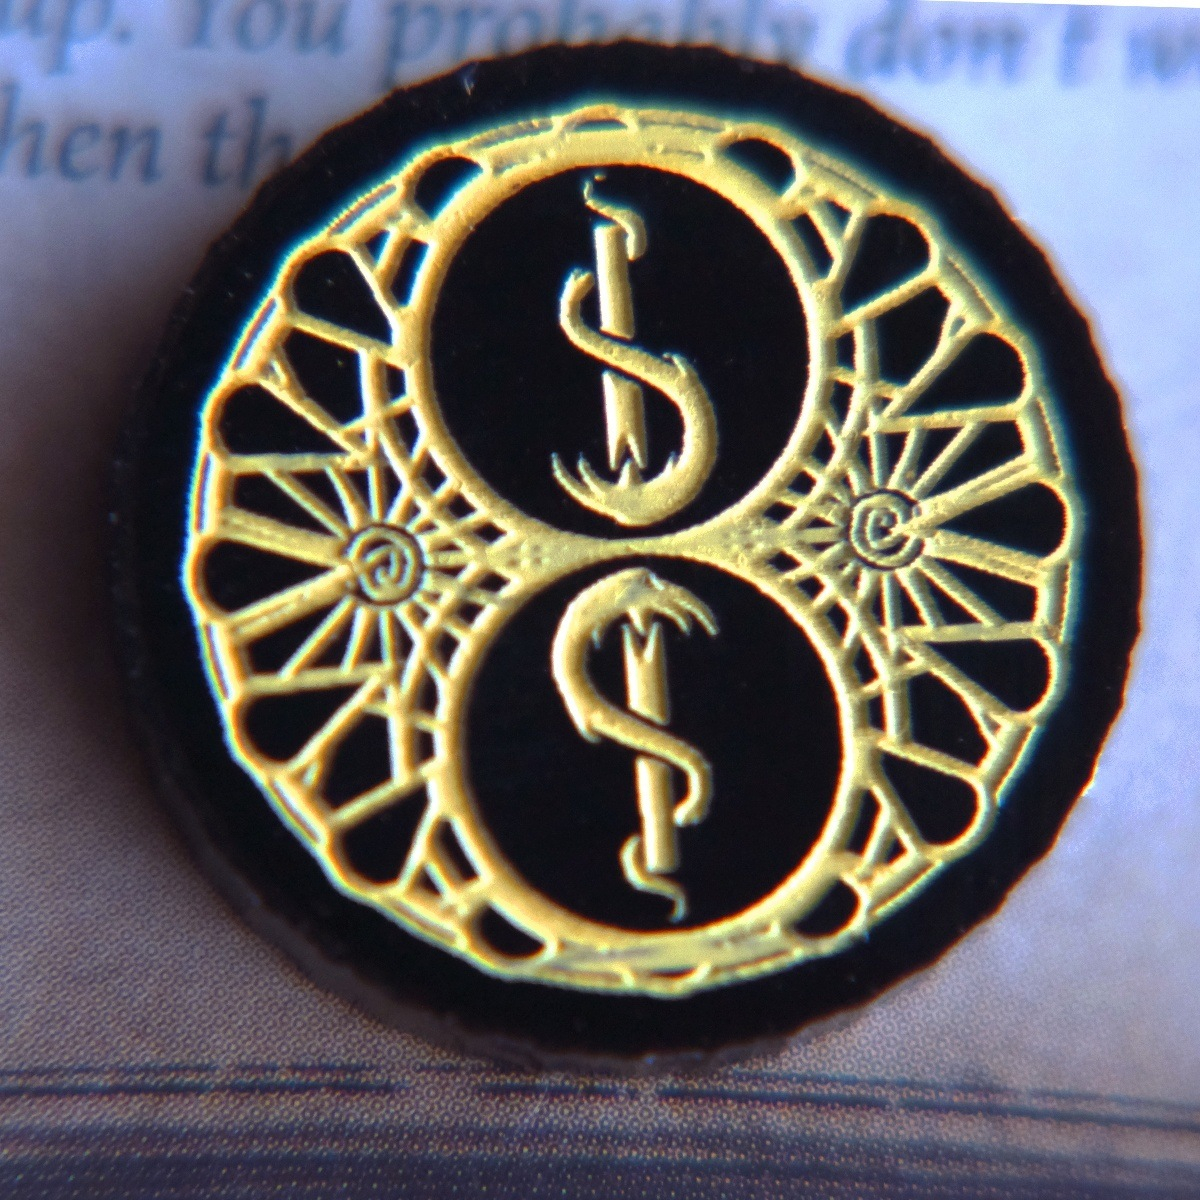 Close up of the two-value side of the Carcosa Limited Edition Doom Token highlighting the inverted torch motif